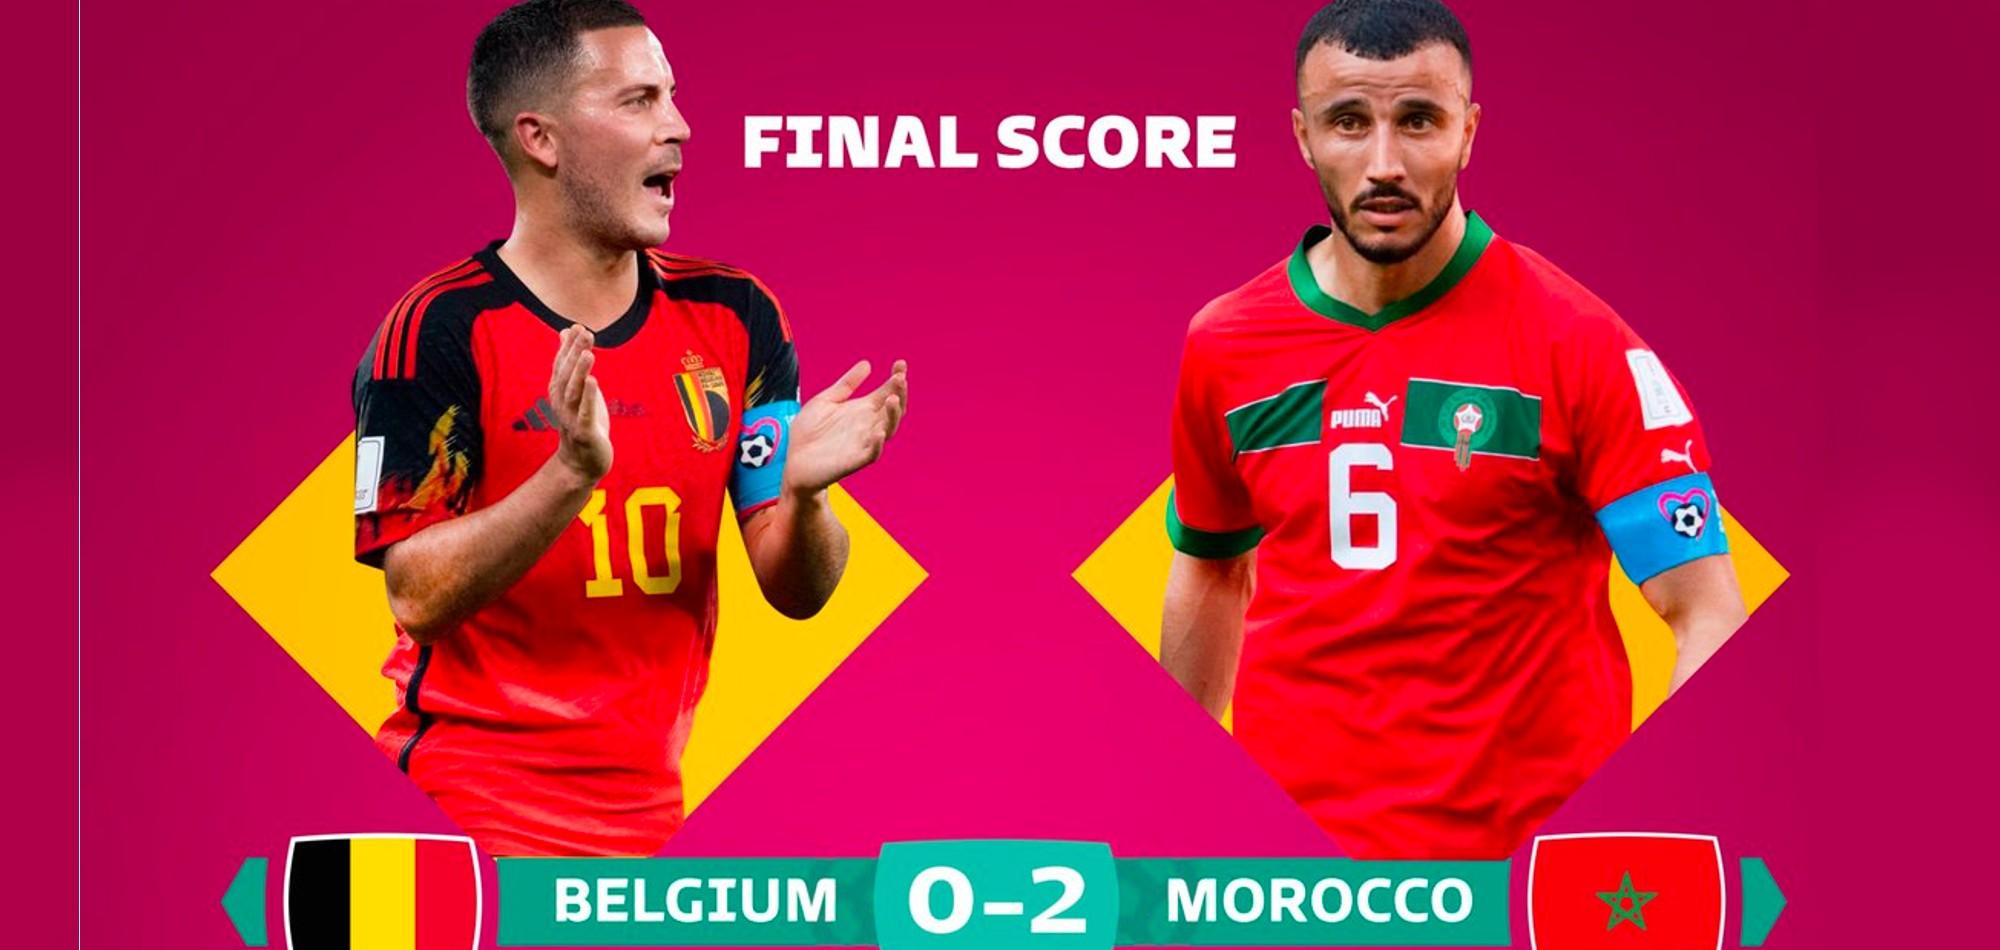 Morocco upset Belgium with 2-0 victory to go top of Group F